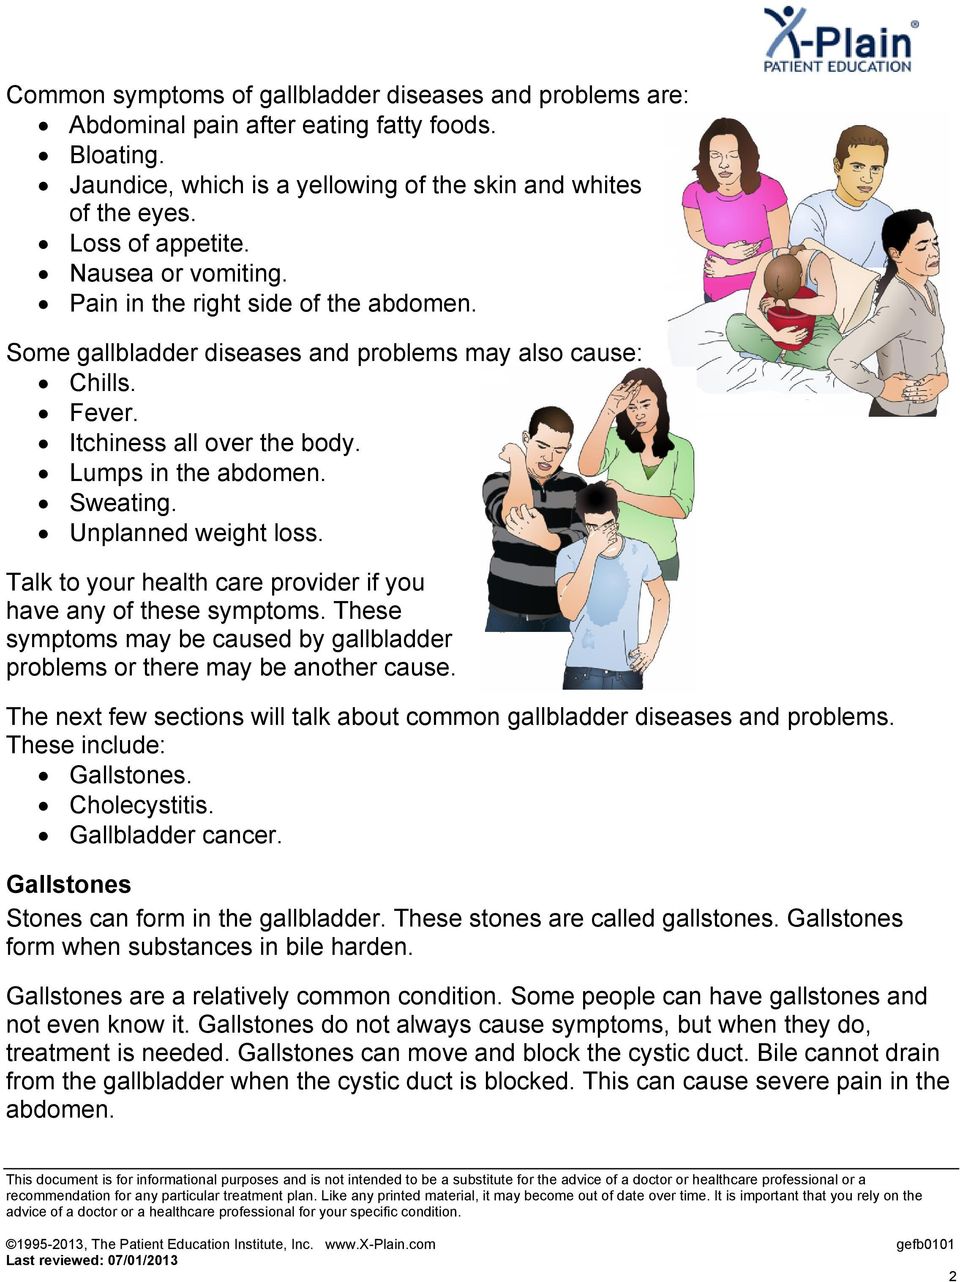 Unplanned weight loss. Talk to your health care provider if you have any of these symptoms. These symptoms may be caused by gallbladd er problems or there may be another cause.